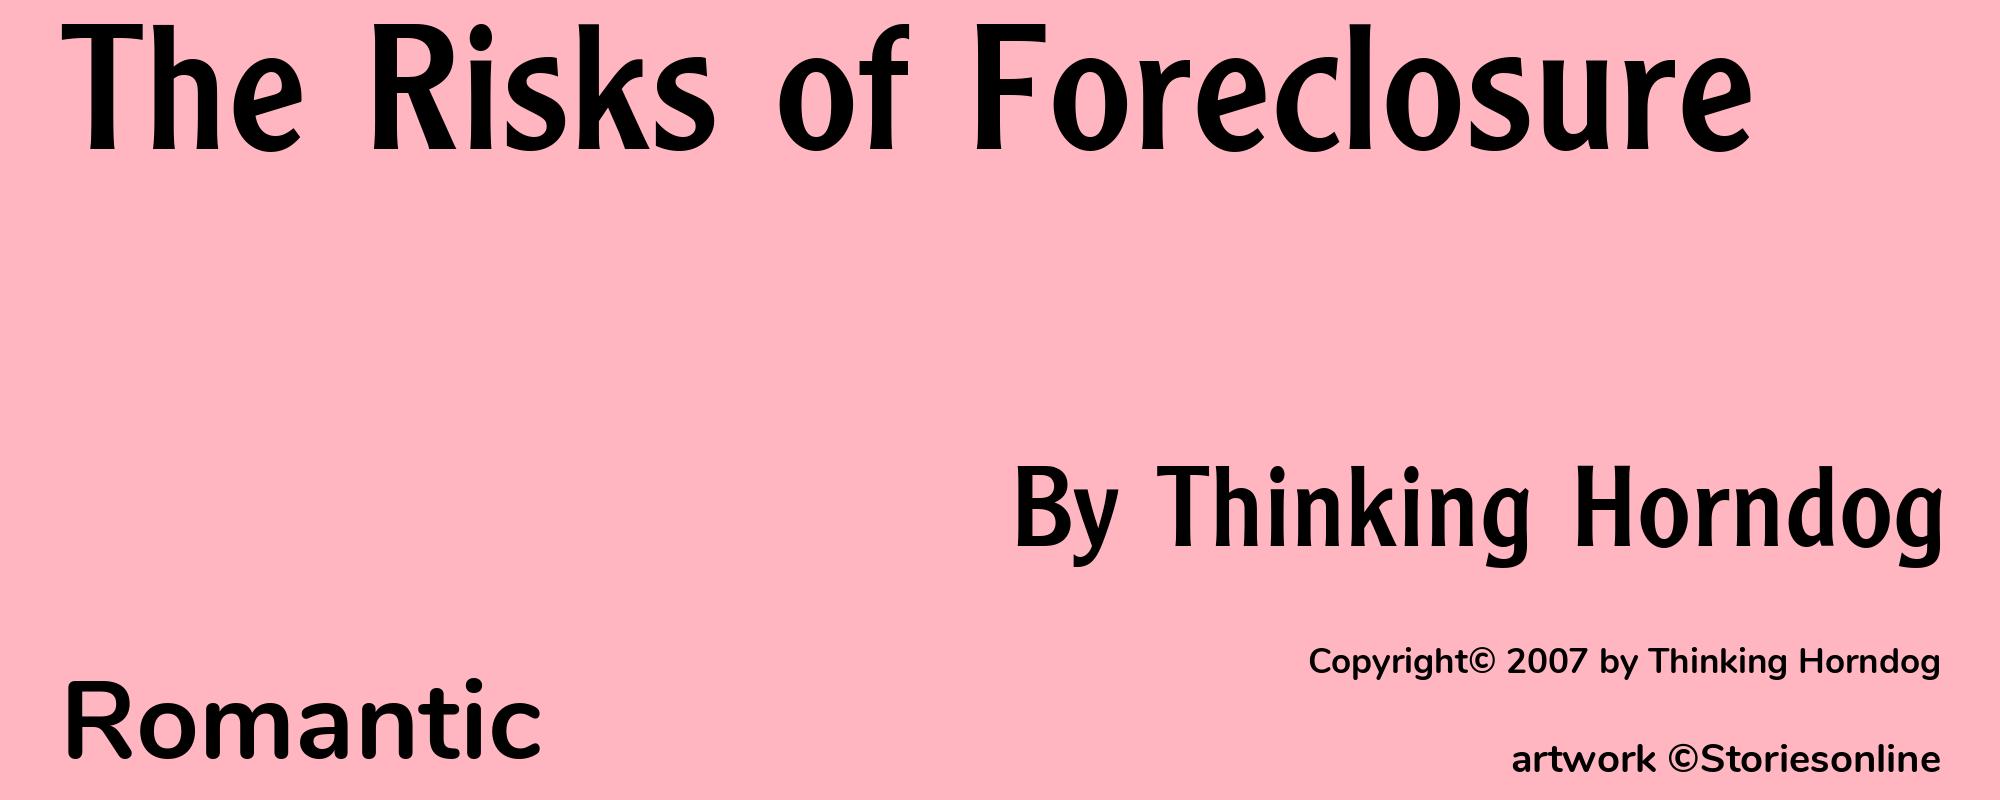 The Risks of Foreclosure - Cover